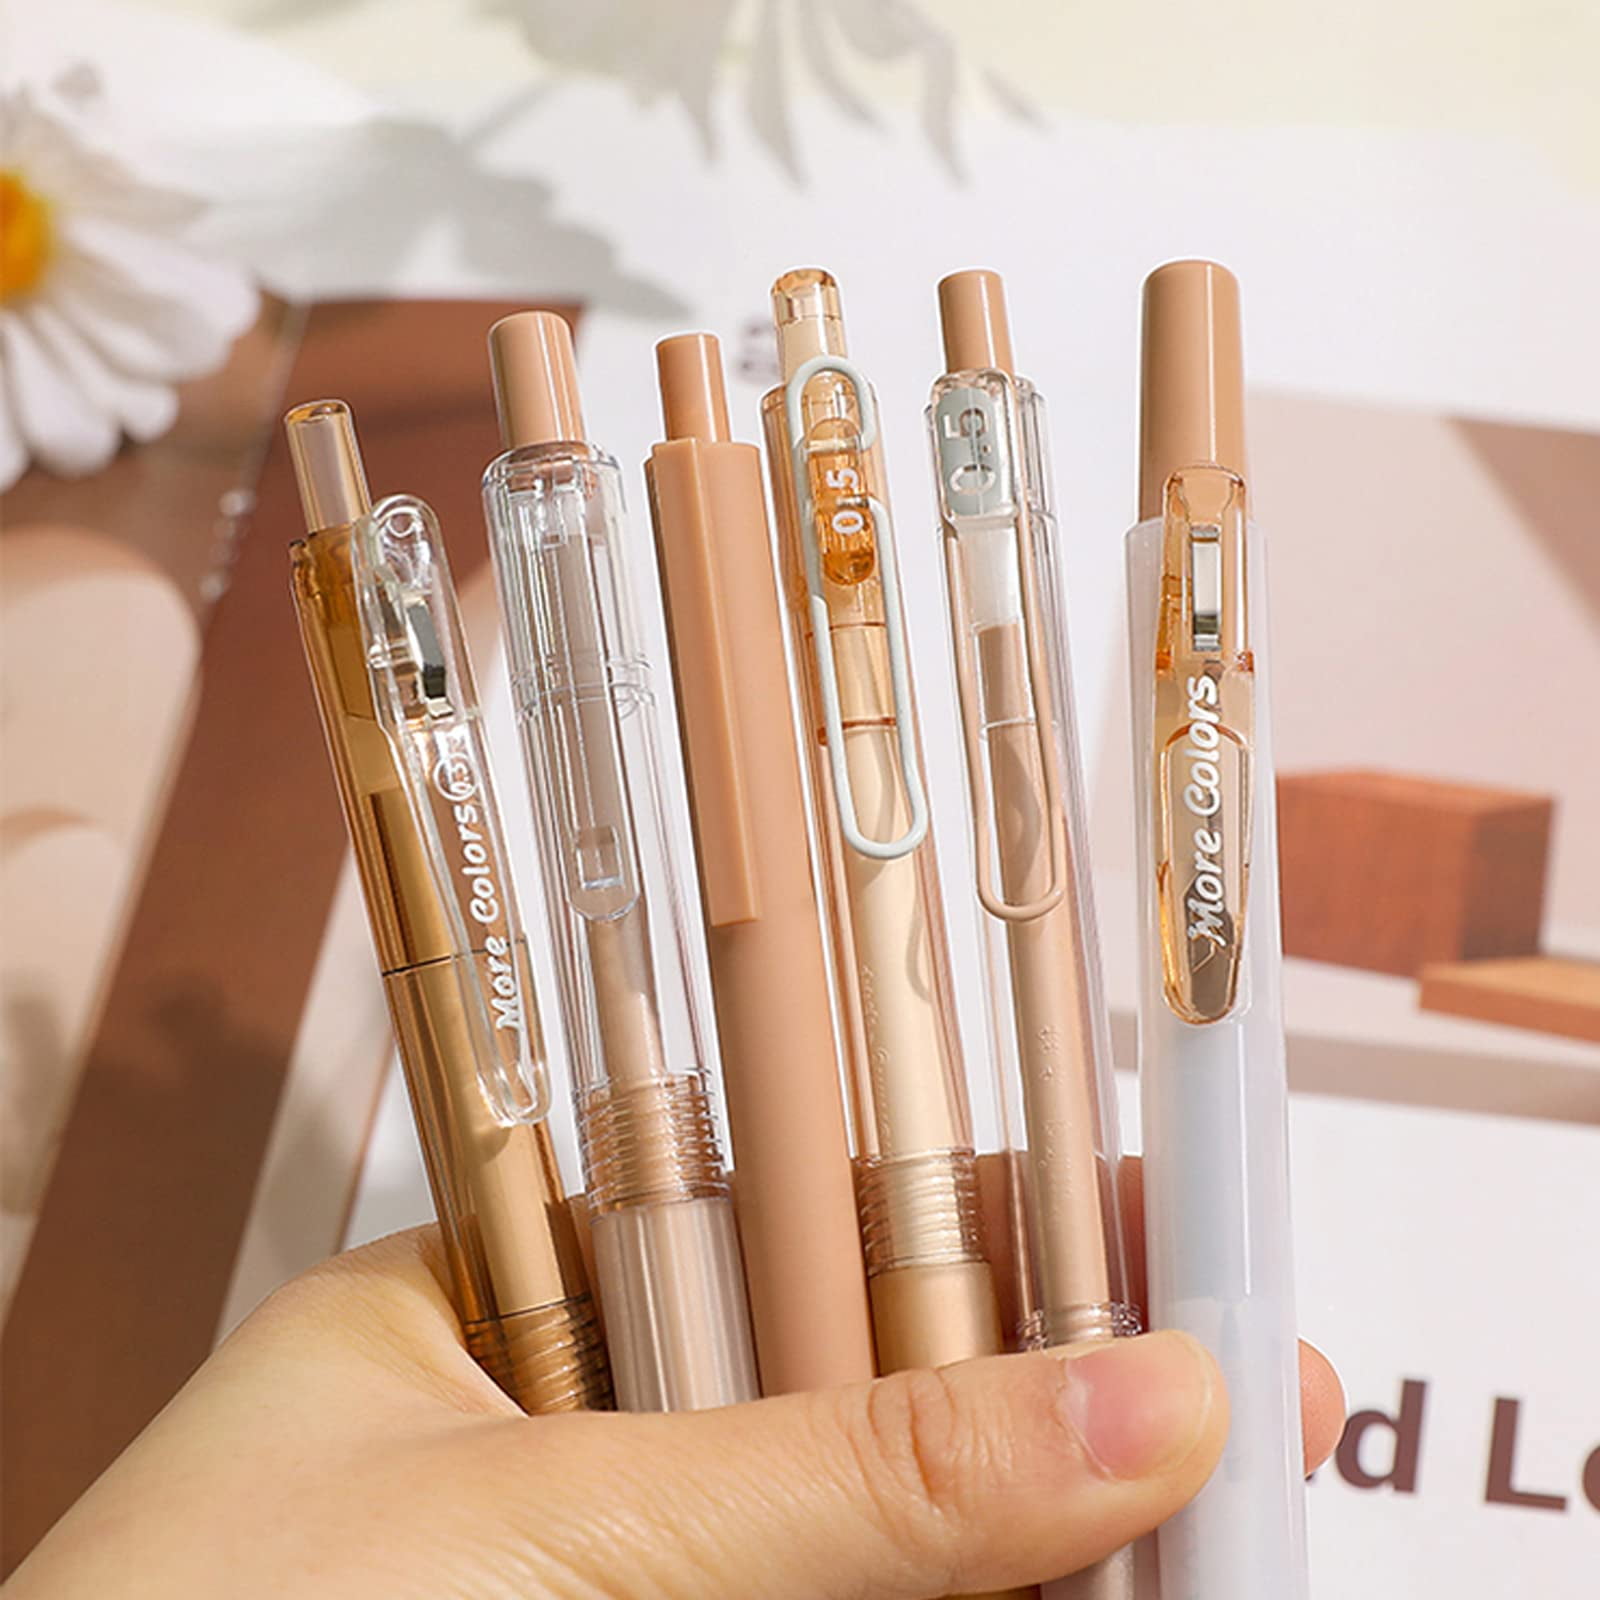 Eastern Trade Cute Pens for Girls Cute Gel Pens Fine Point Smooth Writing  Pens 0.5 mm Black Pens, Nice Kawaii Office School Supplies Gifts for Girls